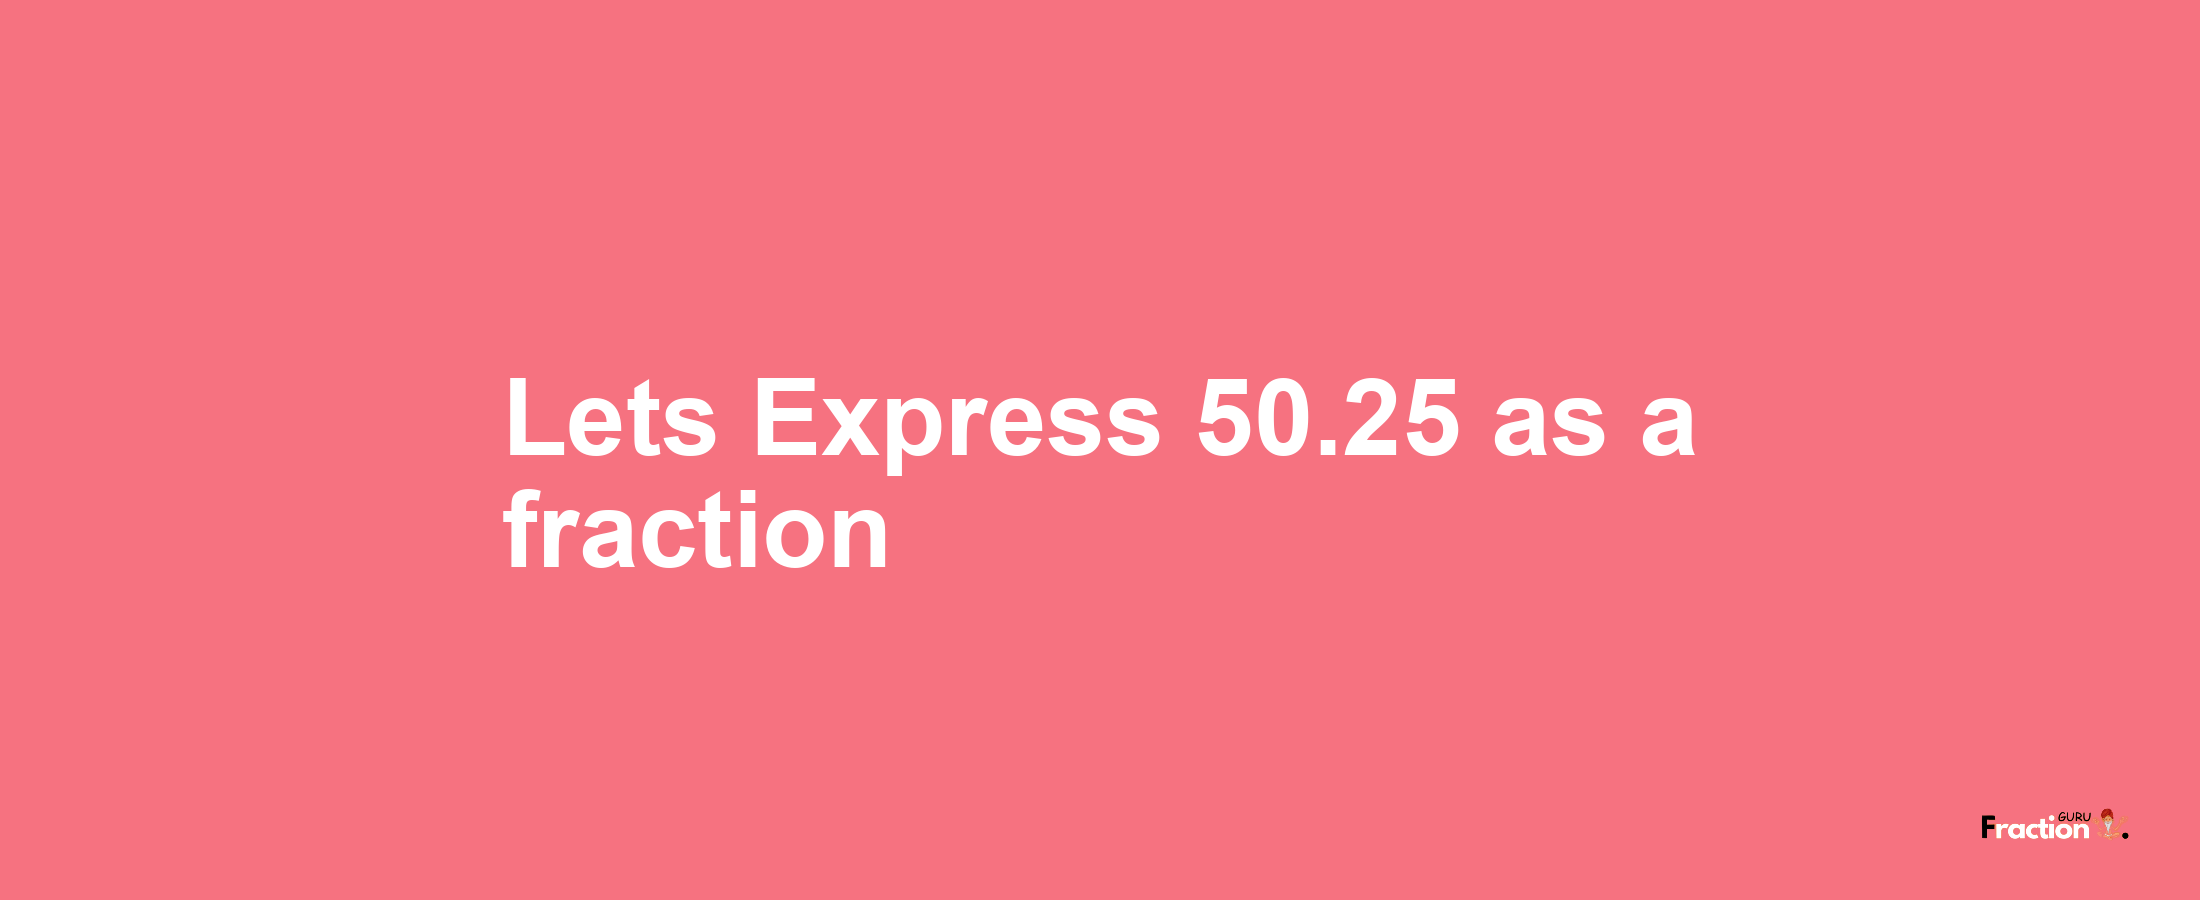 Lets Express 50.25 as afraction